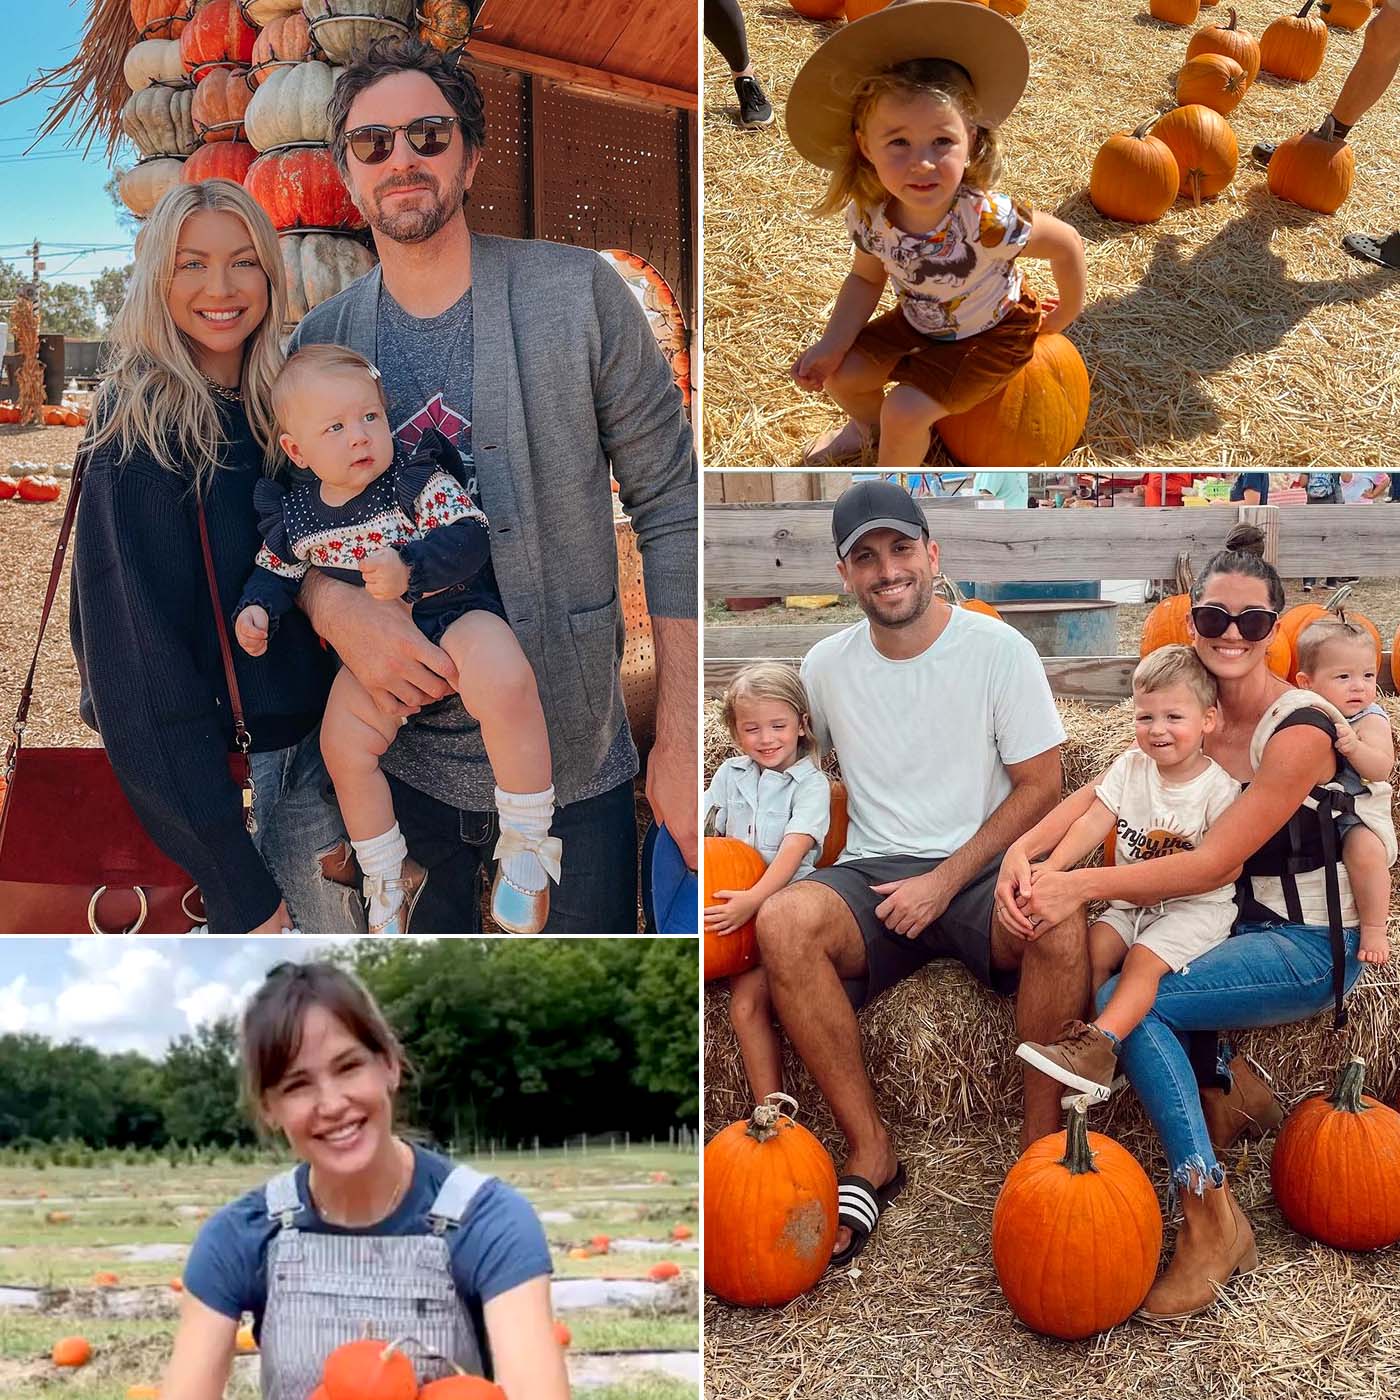 Stars Pumpkin Patches Through the Years